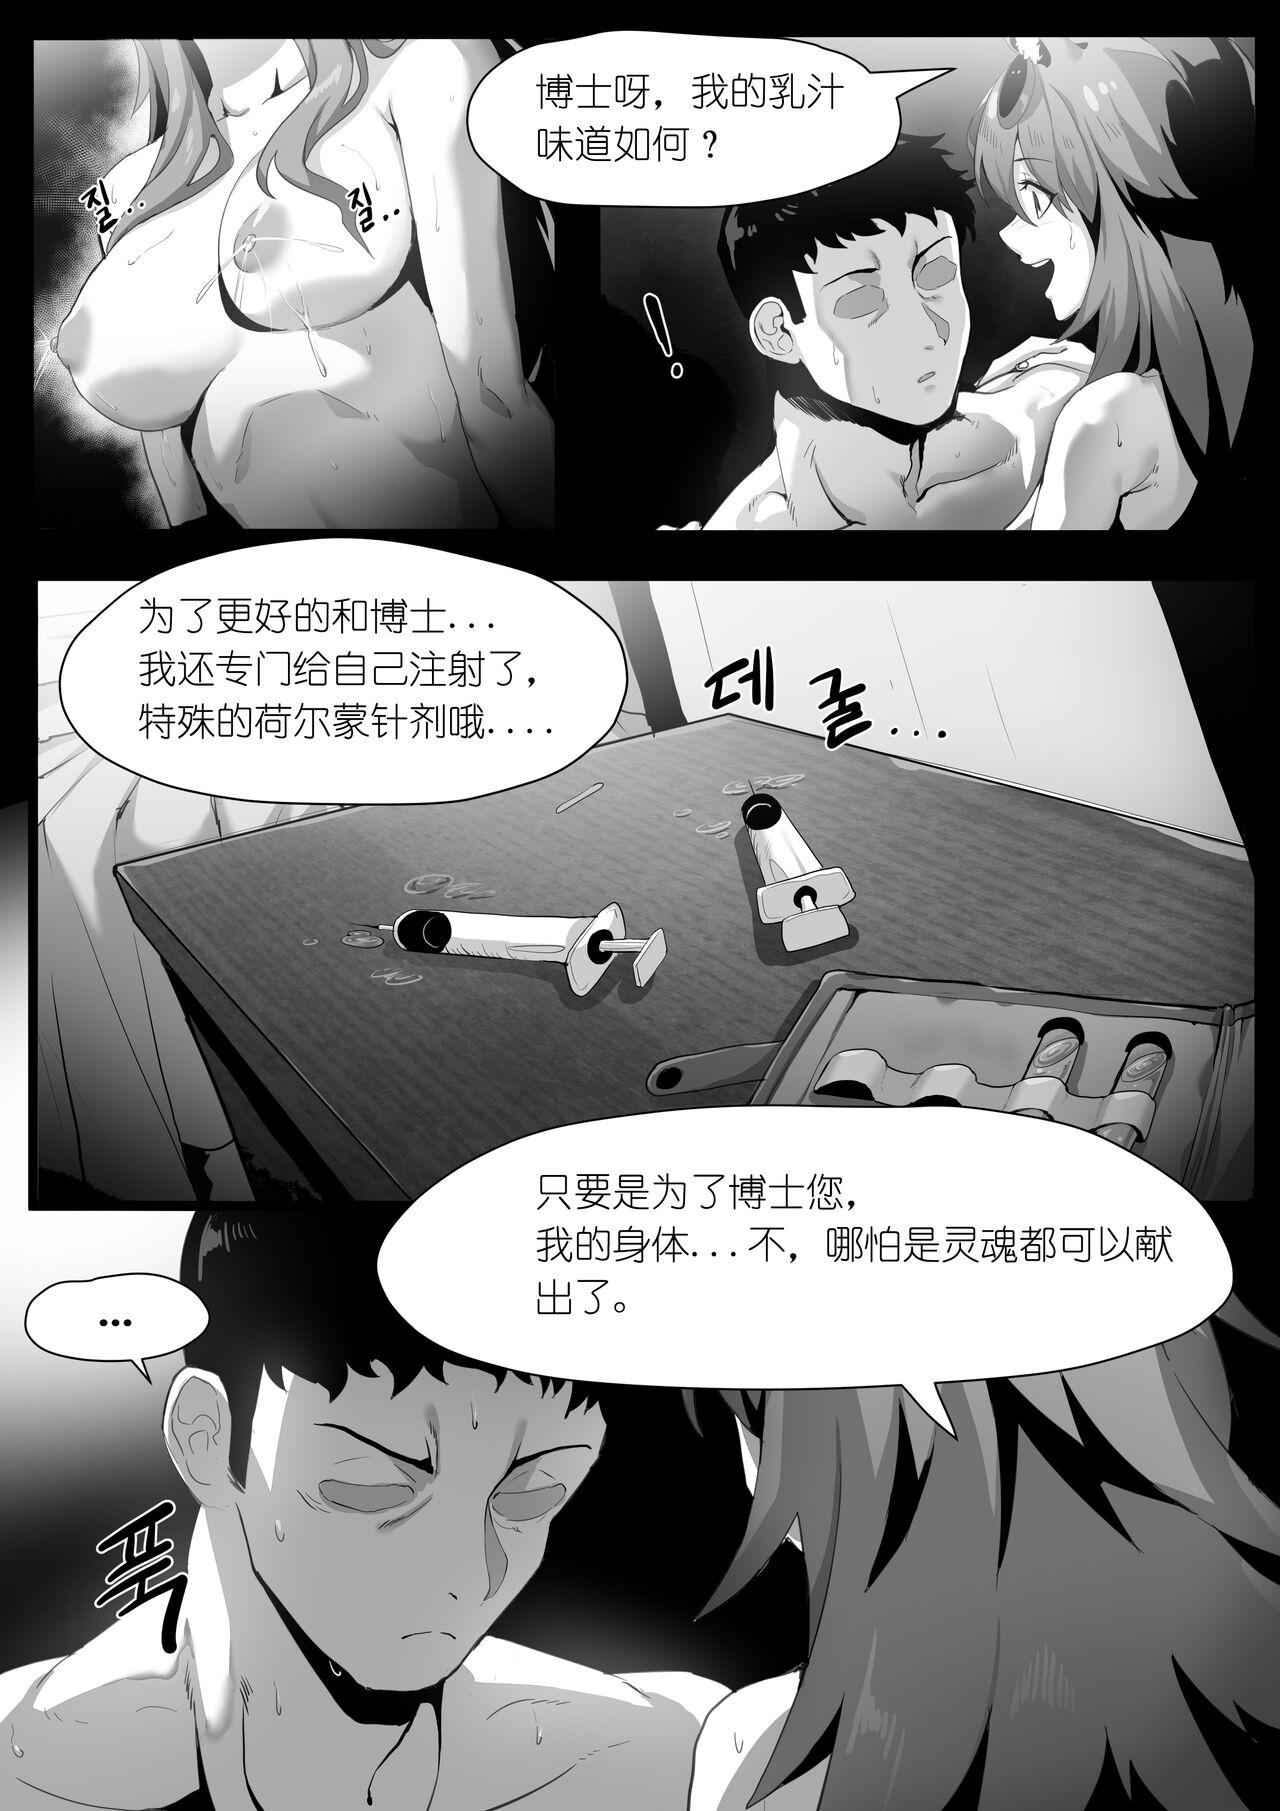 Dicks 欲望方舟记录3 - Arknights Tanned - Page 4